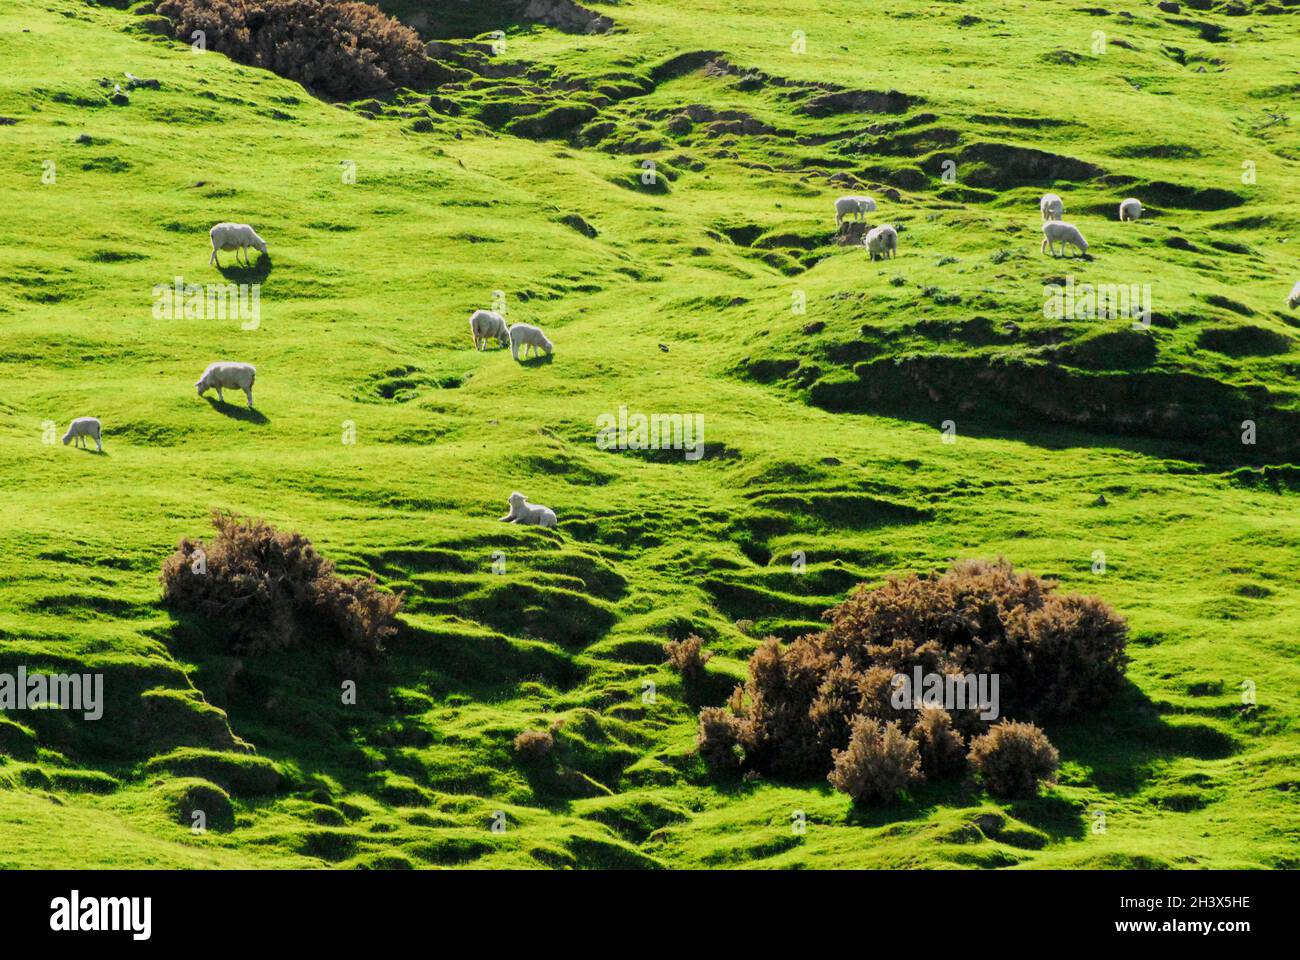 An iconic New Zealand view of sheep grazing on a beautiful green hillside in the wonderful afternoon light. Stock Photo